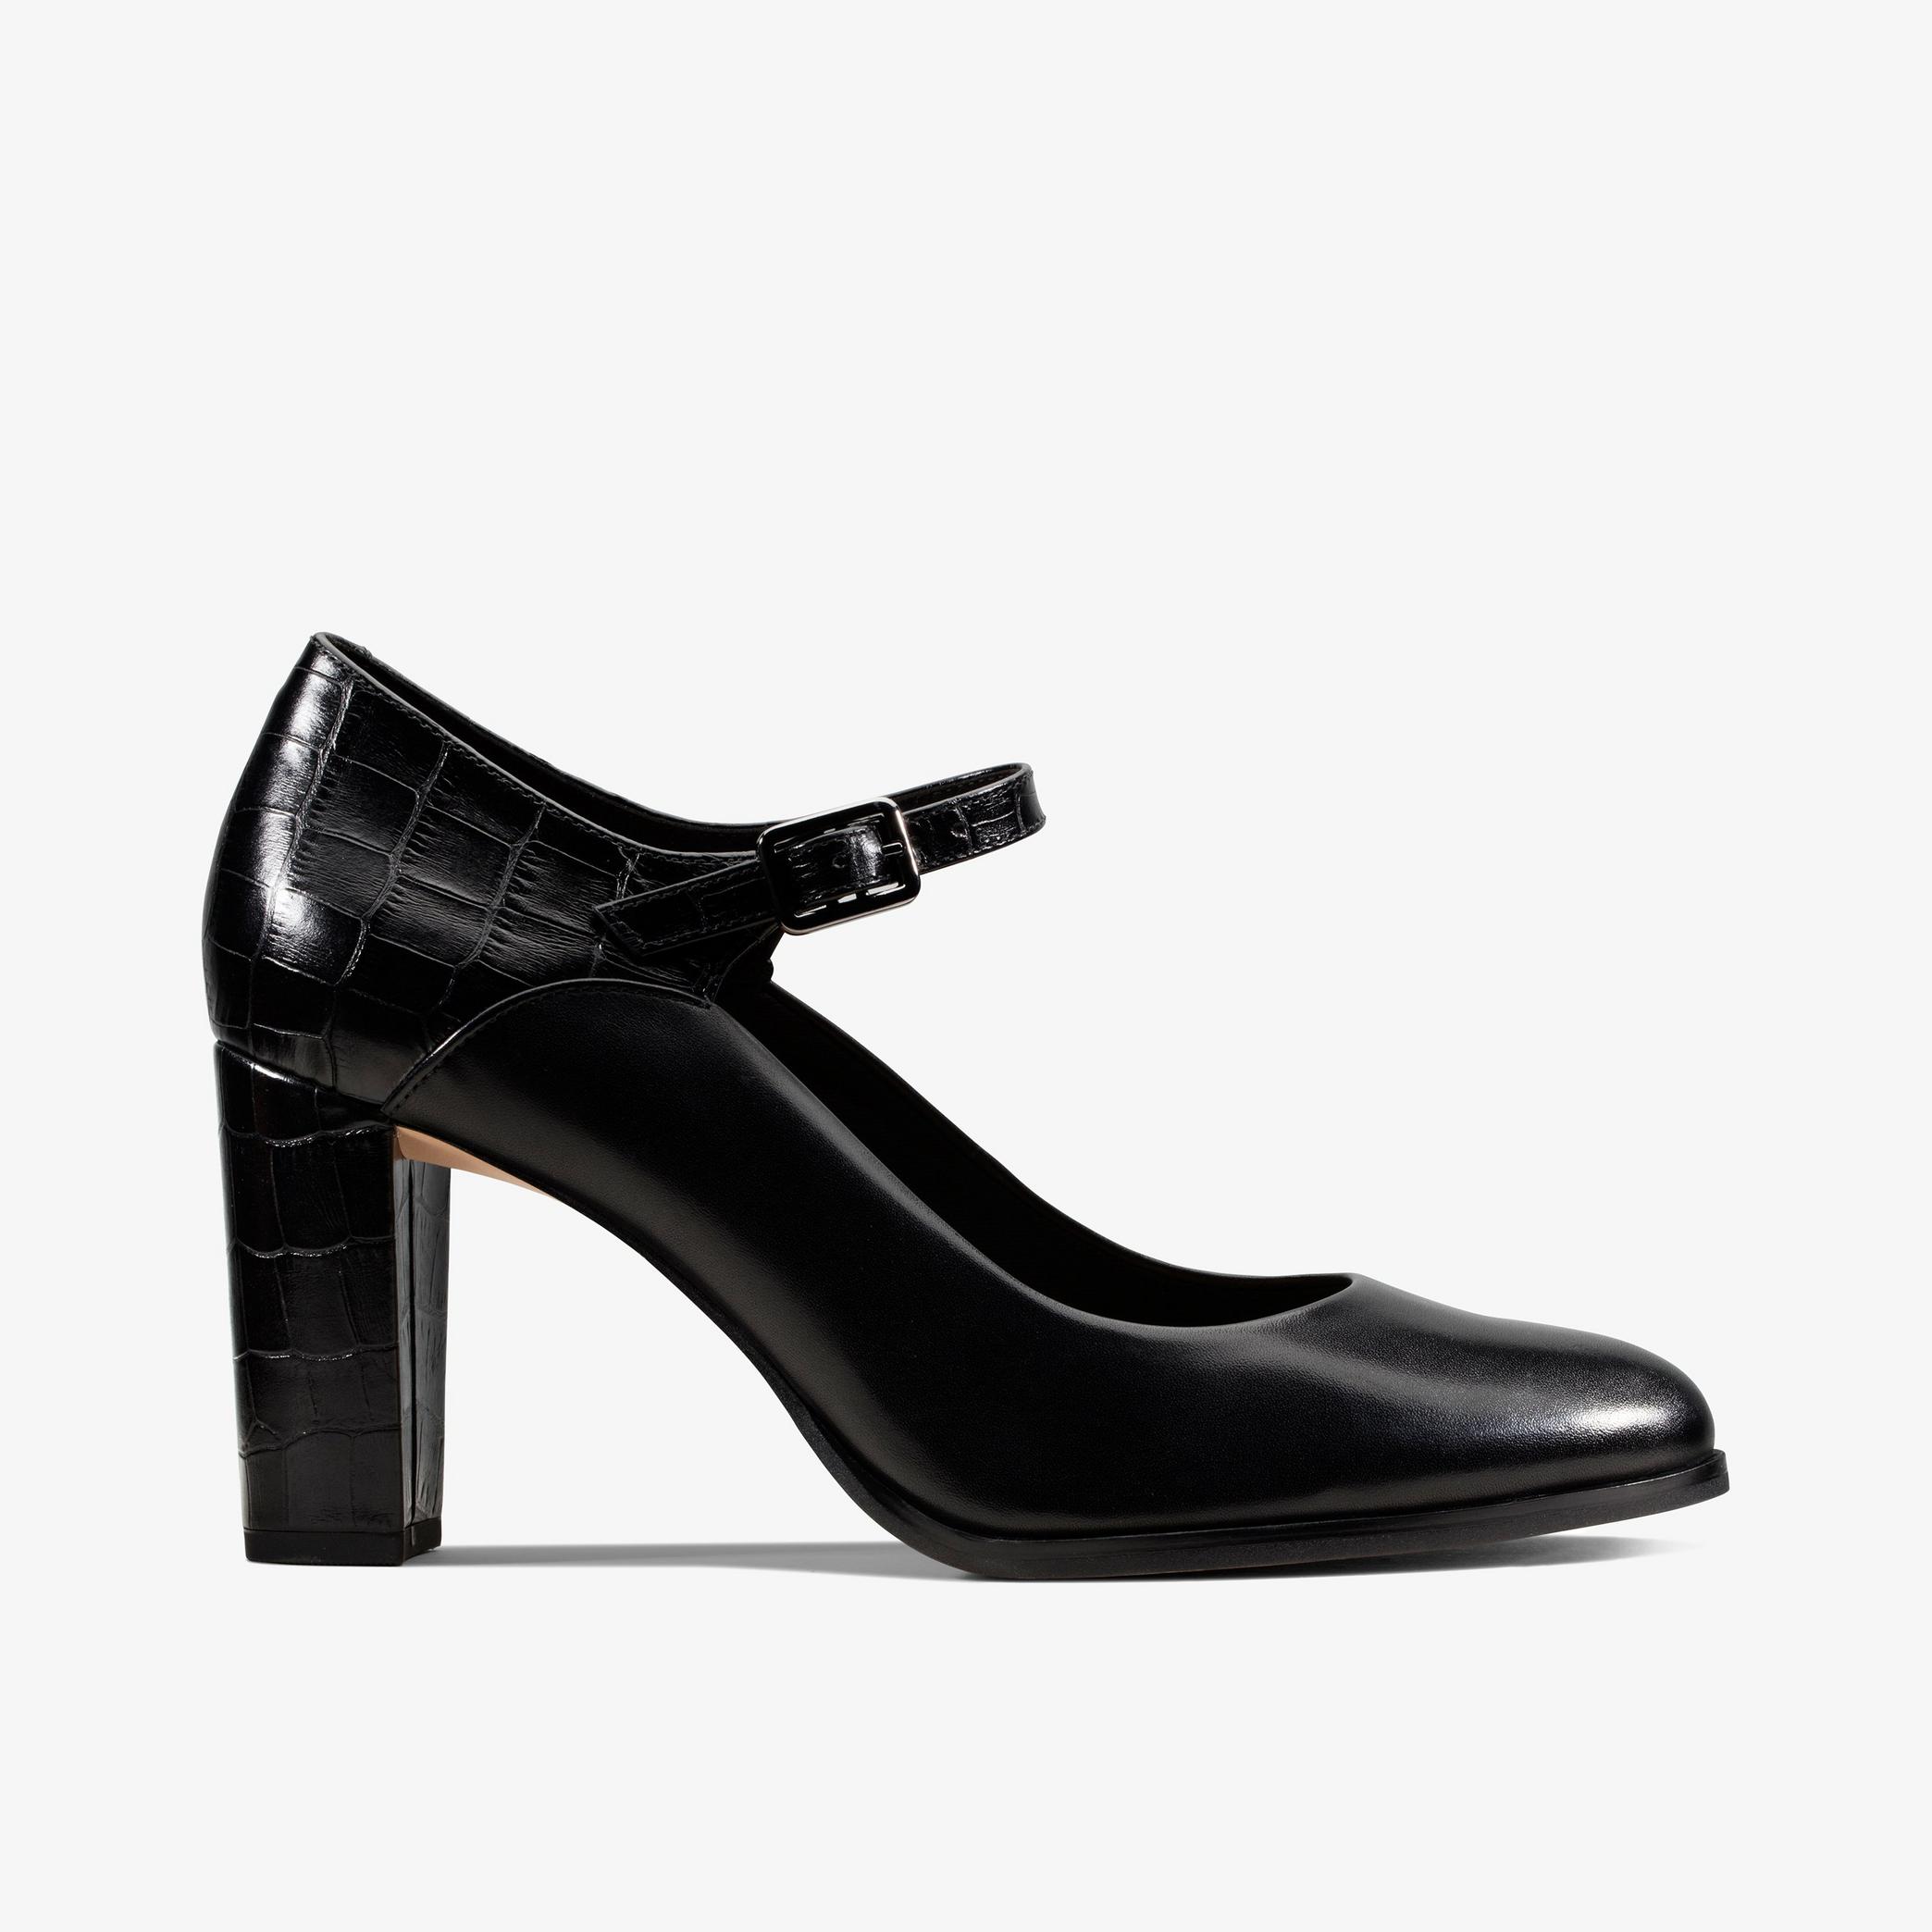 Kaylin Alba Black Combination Court Shoes, view 1 of 6